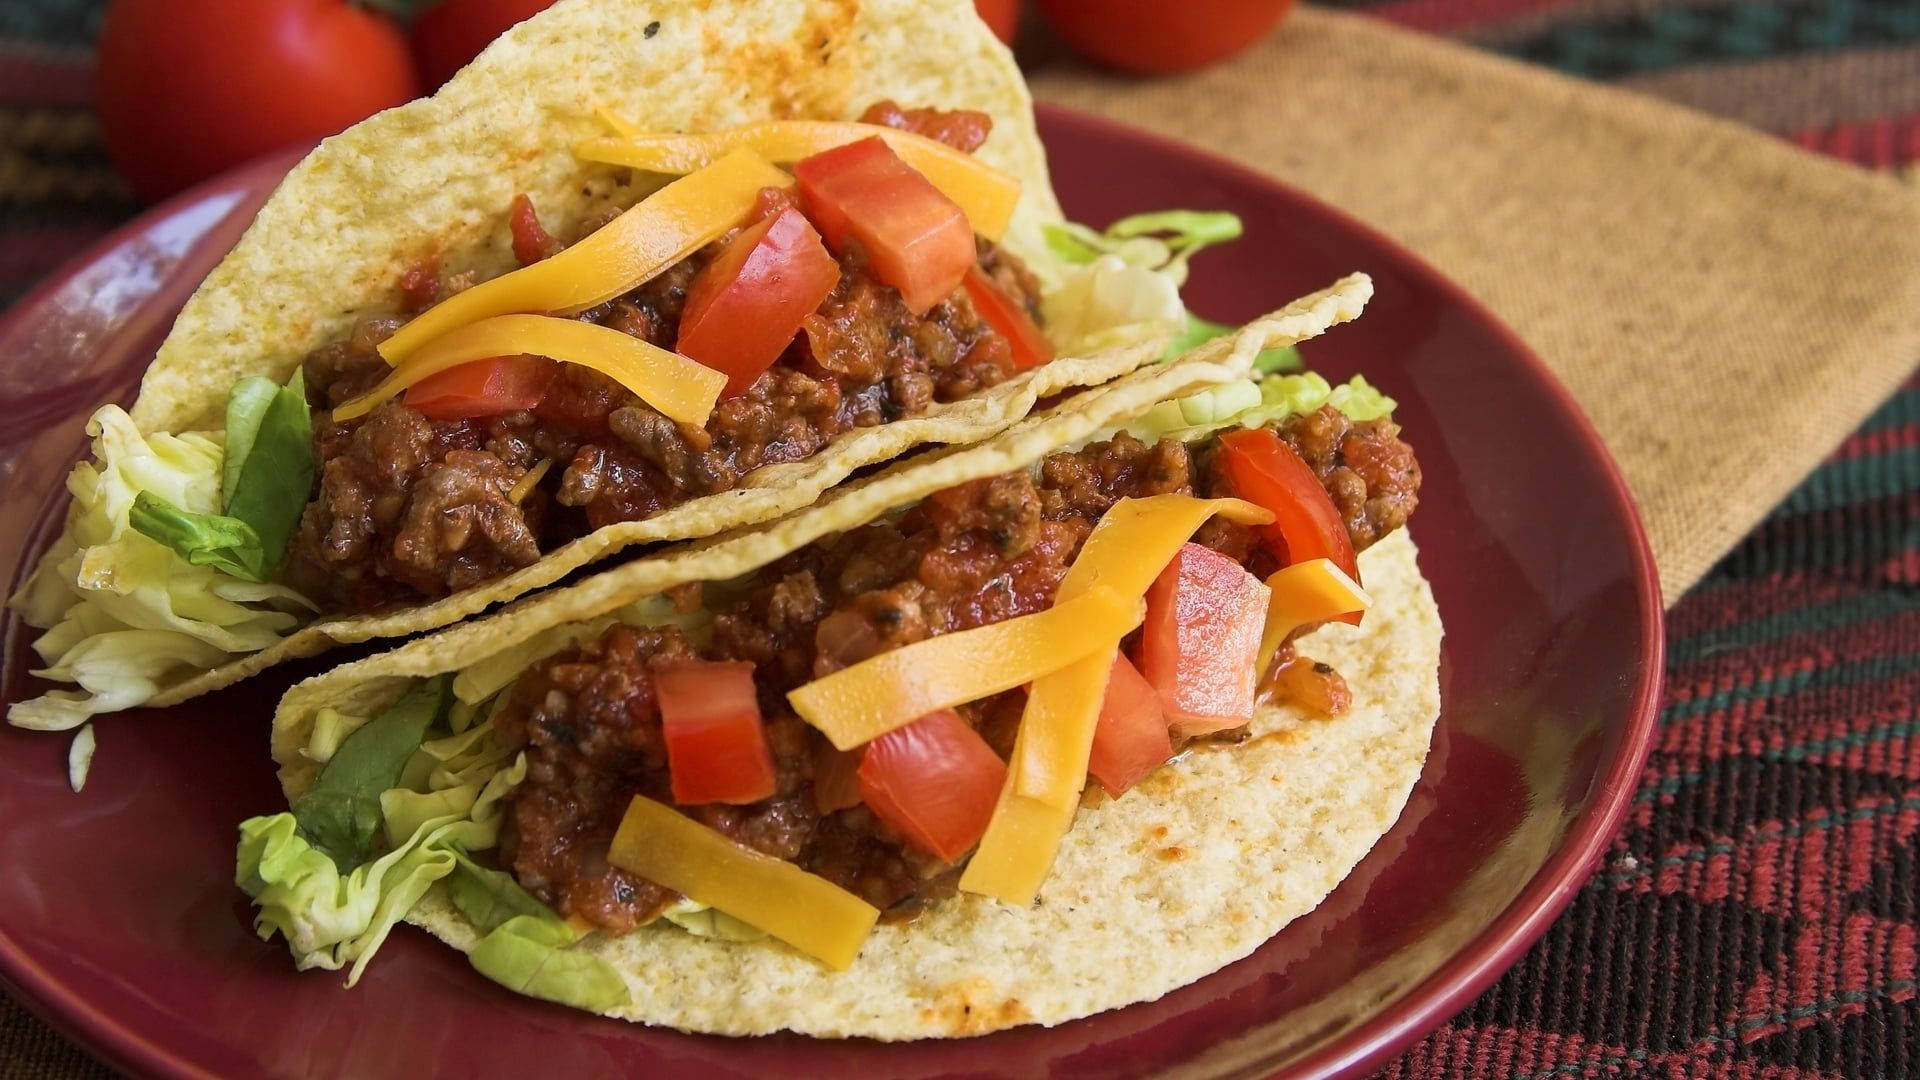 Authentic Flavors - Gourmet Tacos On A Plate